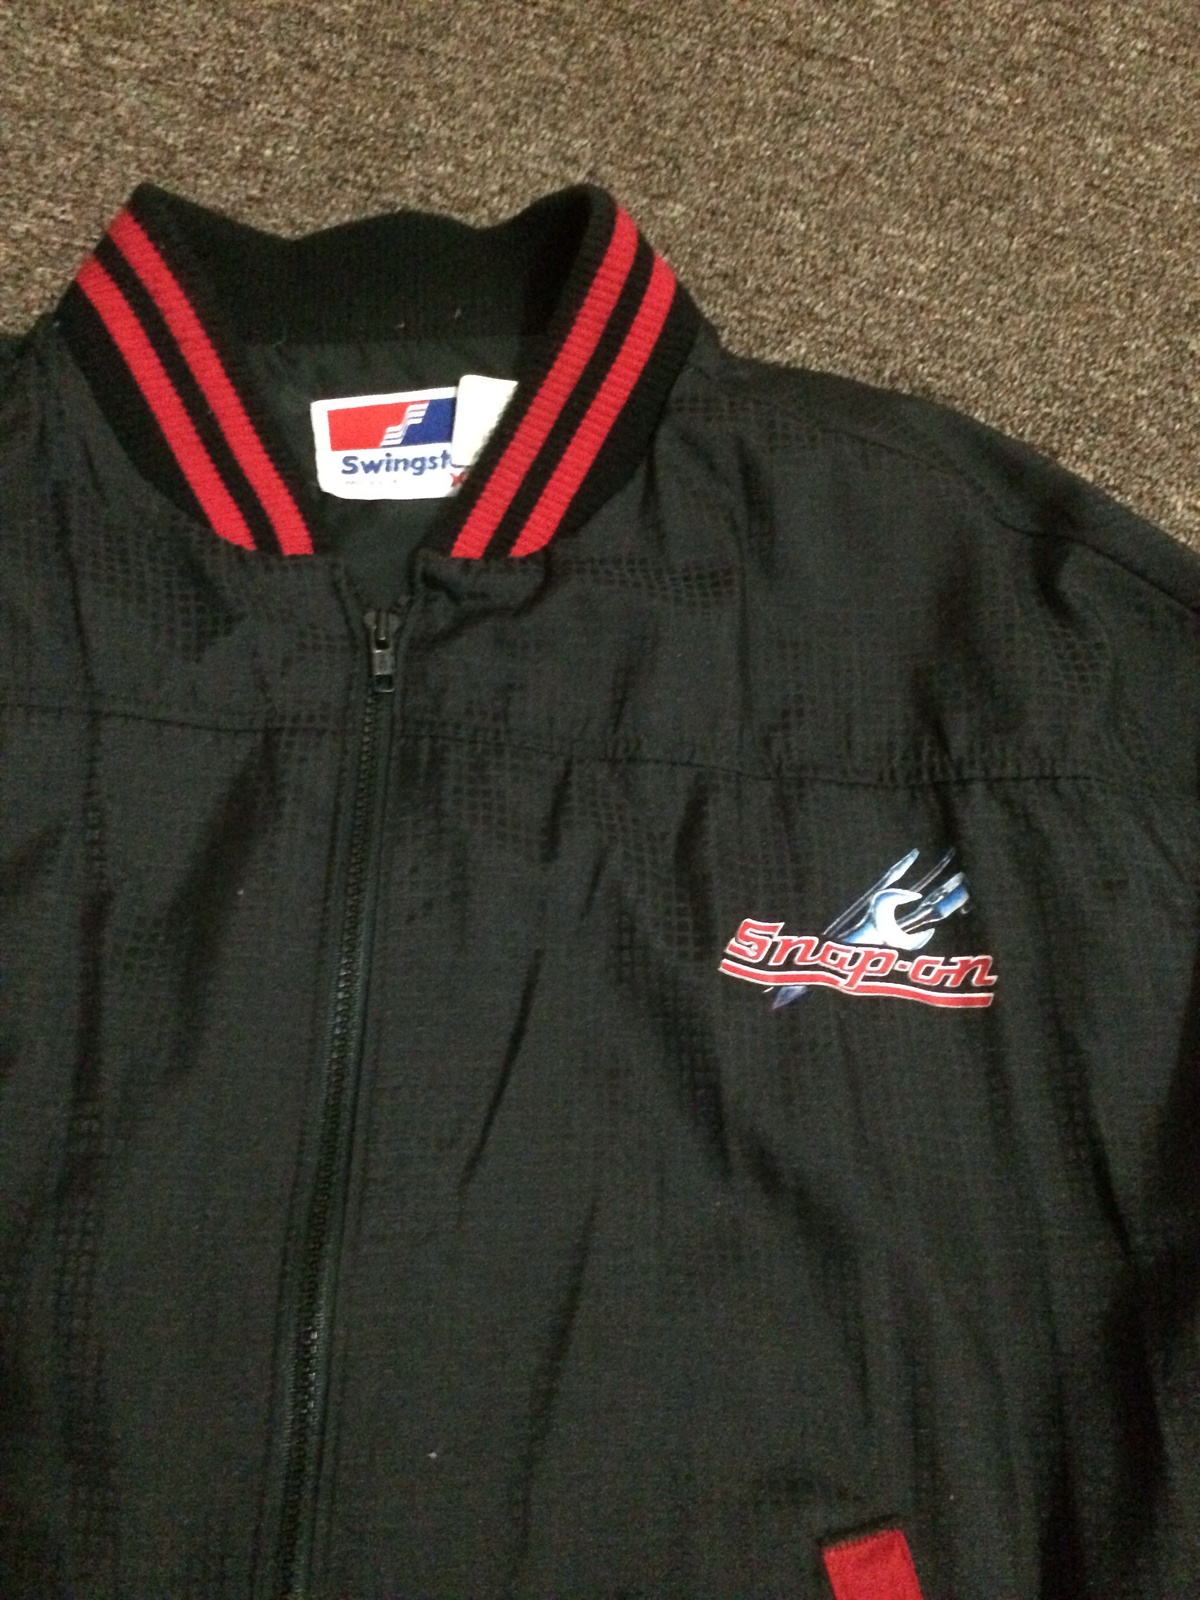 Snap-On Tools Very Cool Jacket Sz- XL and 32 similar items